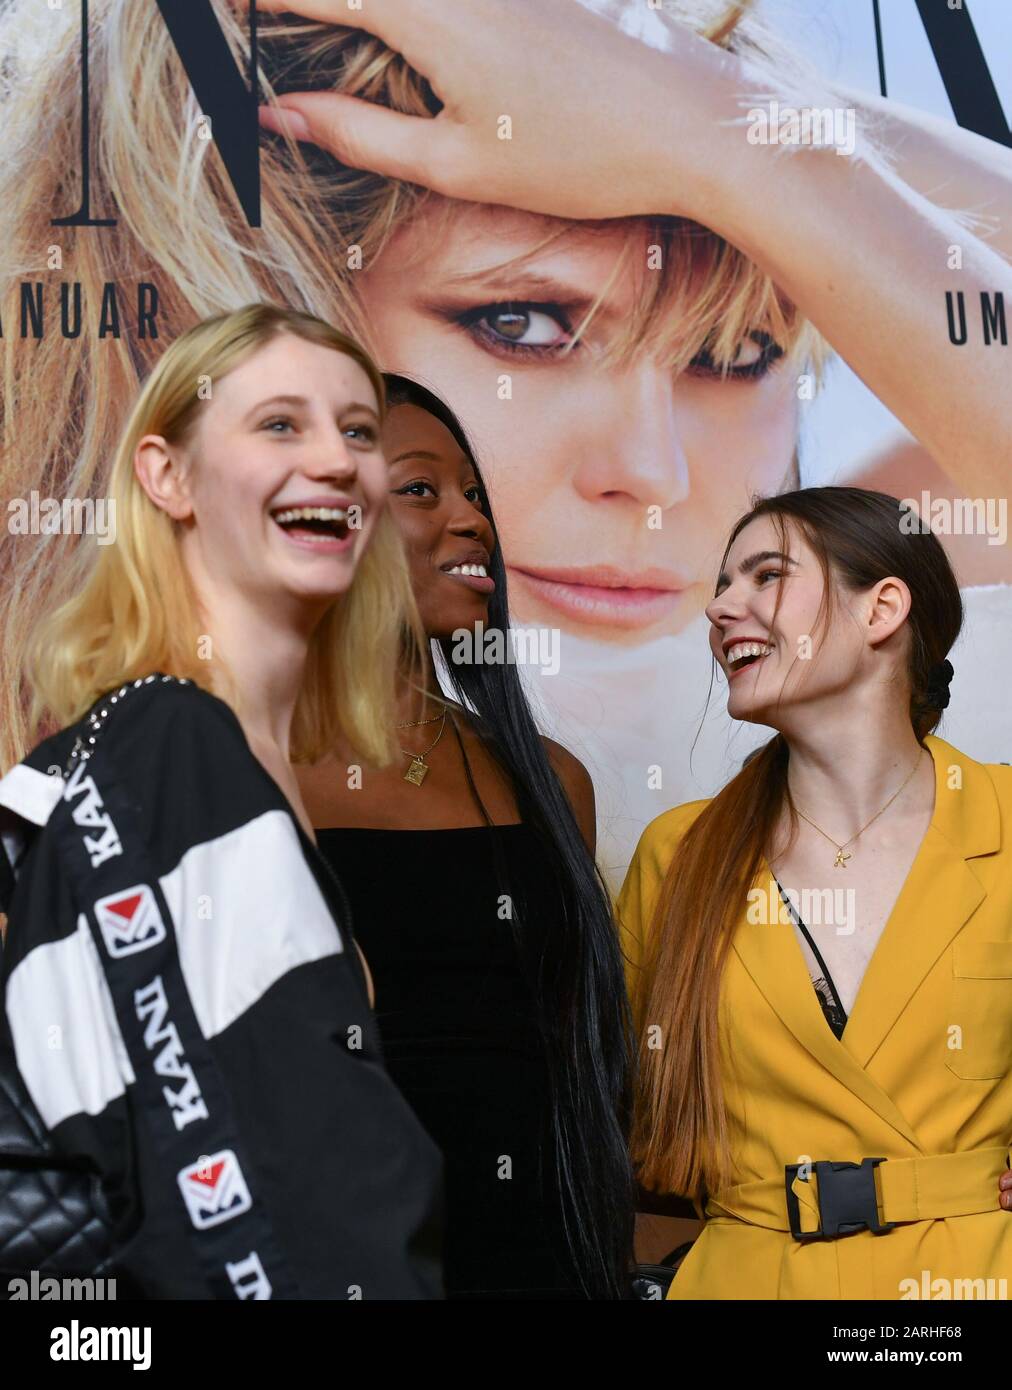 Berlin, Germany. 27th Jan, 2020. The models Trixi Giese (l-r), Toni Dreher-Adenuga and Klaudia with K at the exclusive cinema preview of the 15th season 'Germany's next Topmodel - by Heidi Klum' by ProSieben in the cinema Zoo Palast in front of photos by Heidi Klum. Credit: Jens Kalaene/dpa-Zentralbild/ZB/dpa/Alamy Live News Stock Photo